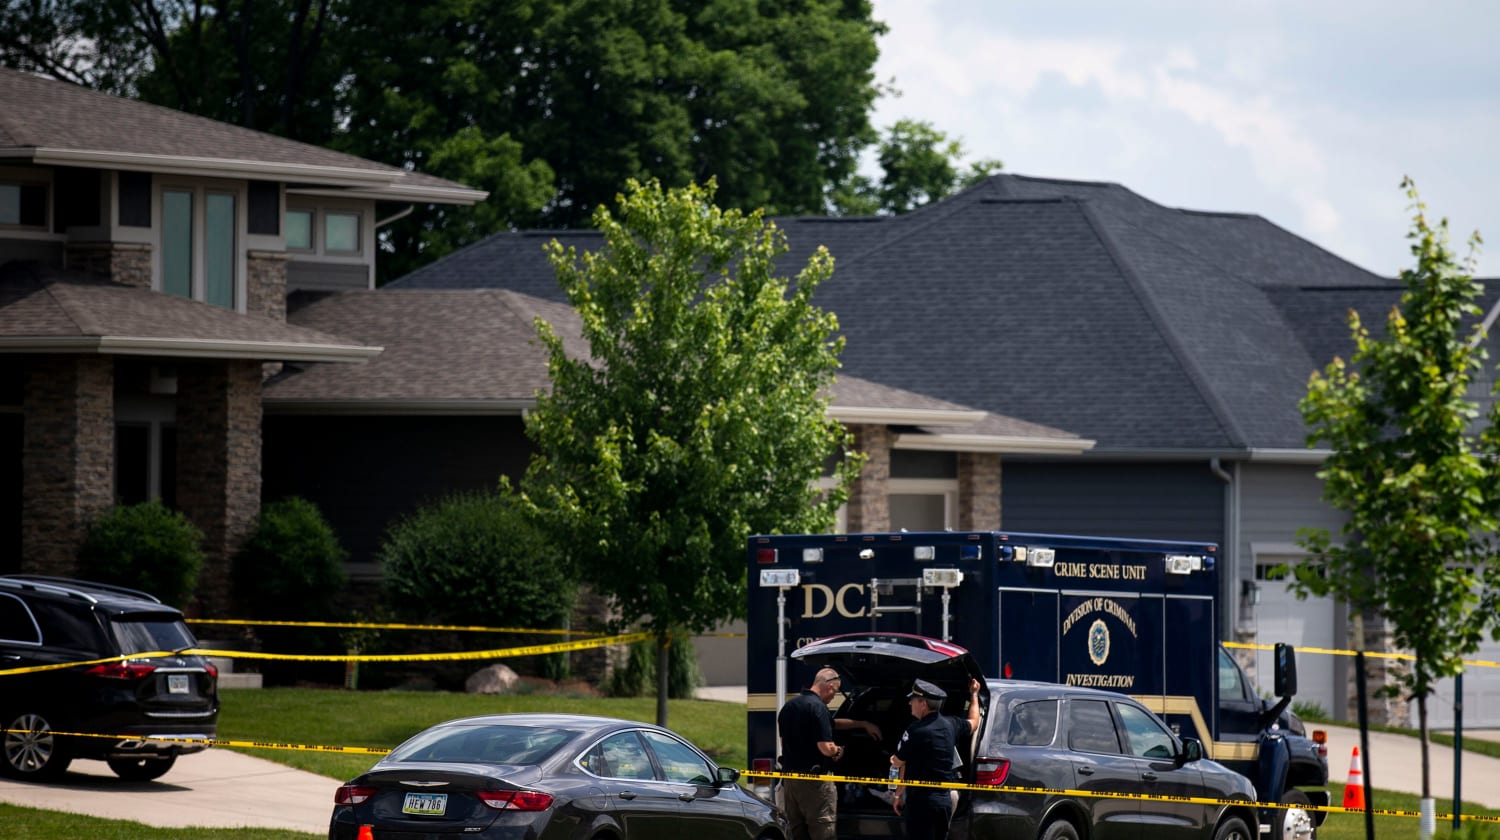 Four people found dead inside Iowa home suffered gunshot wounds, police say